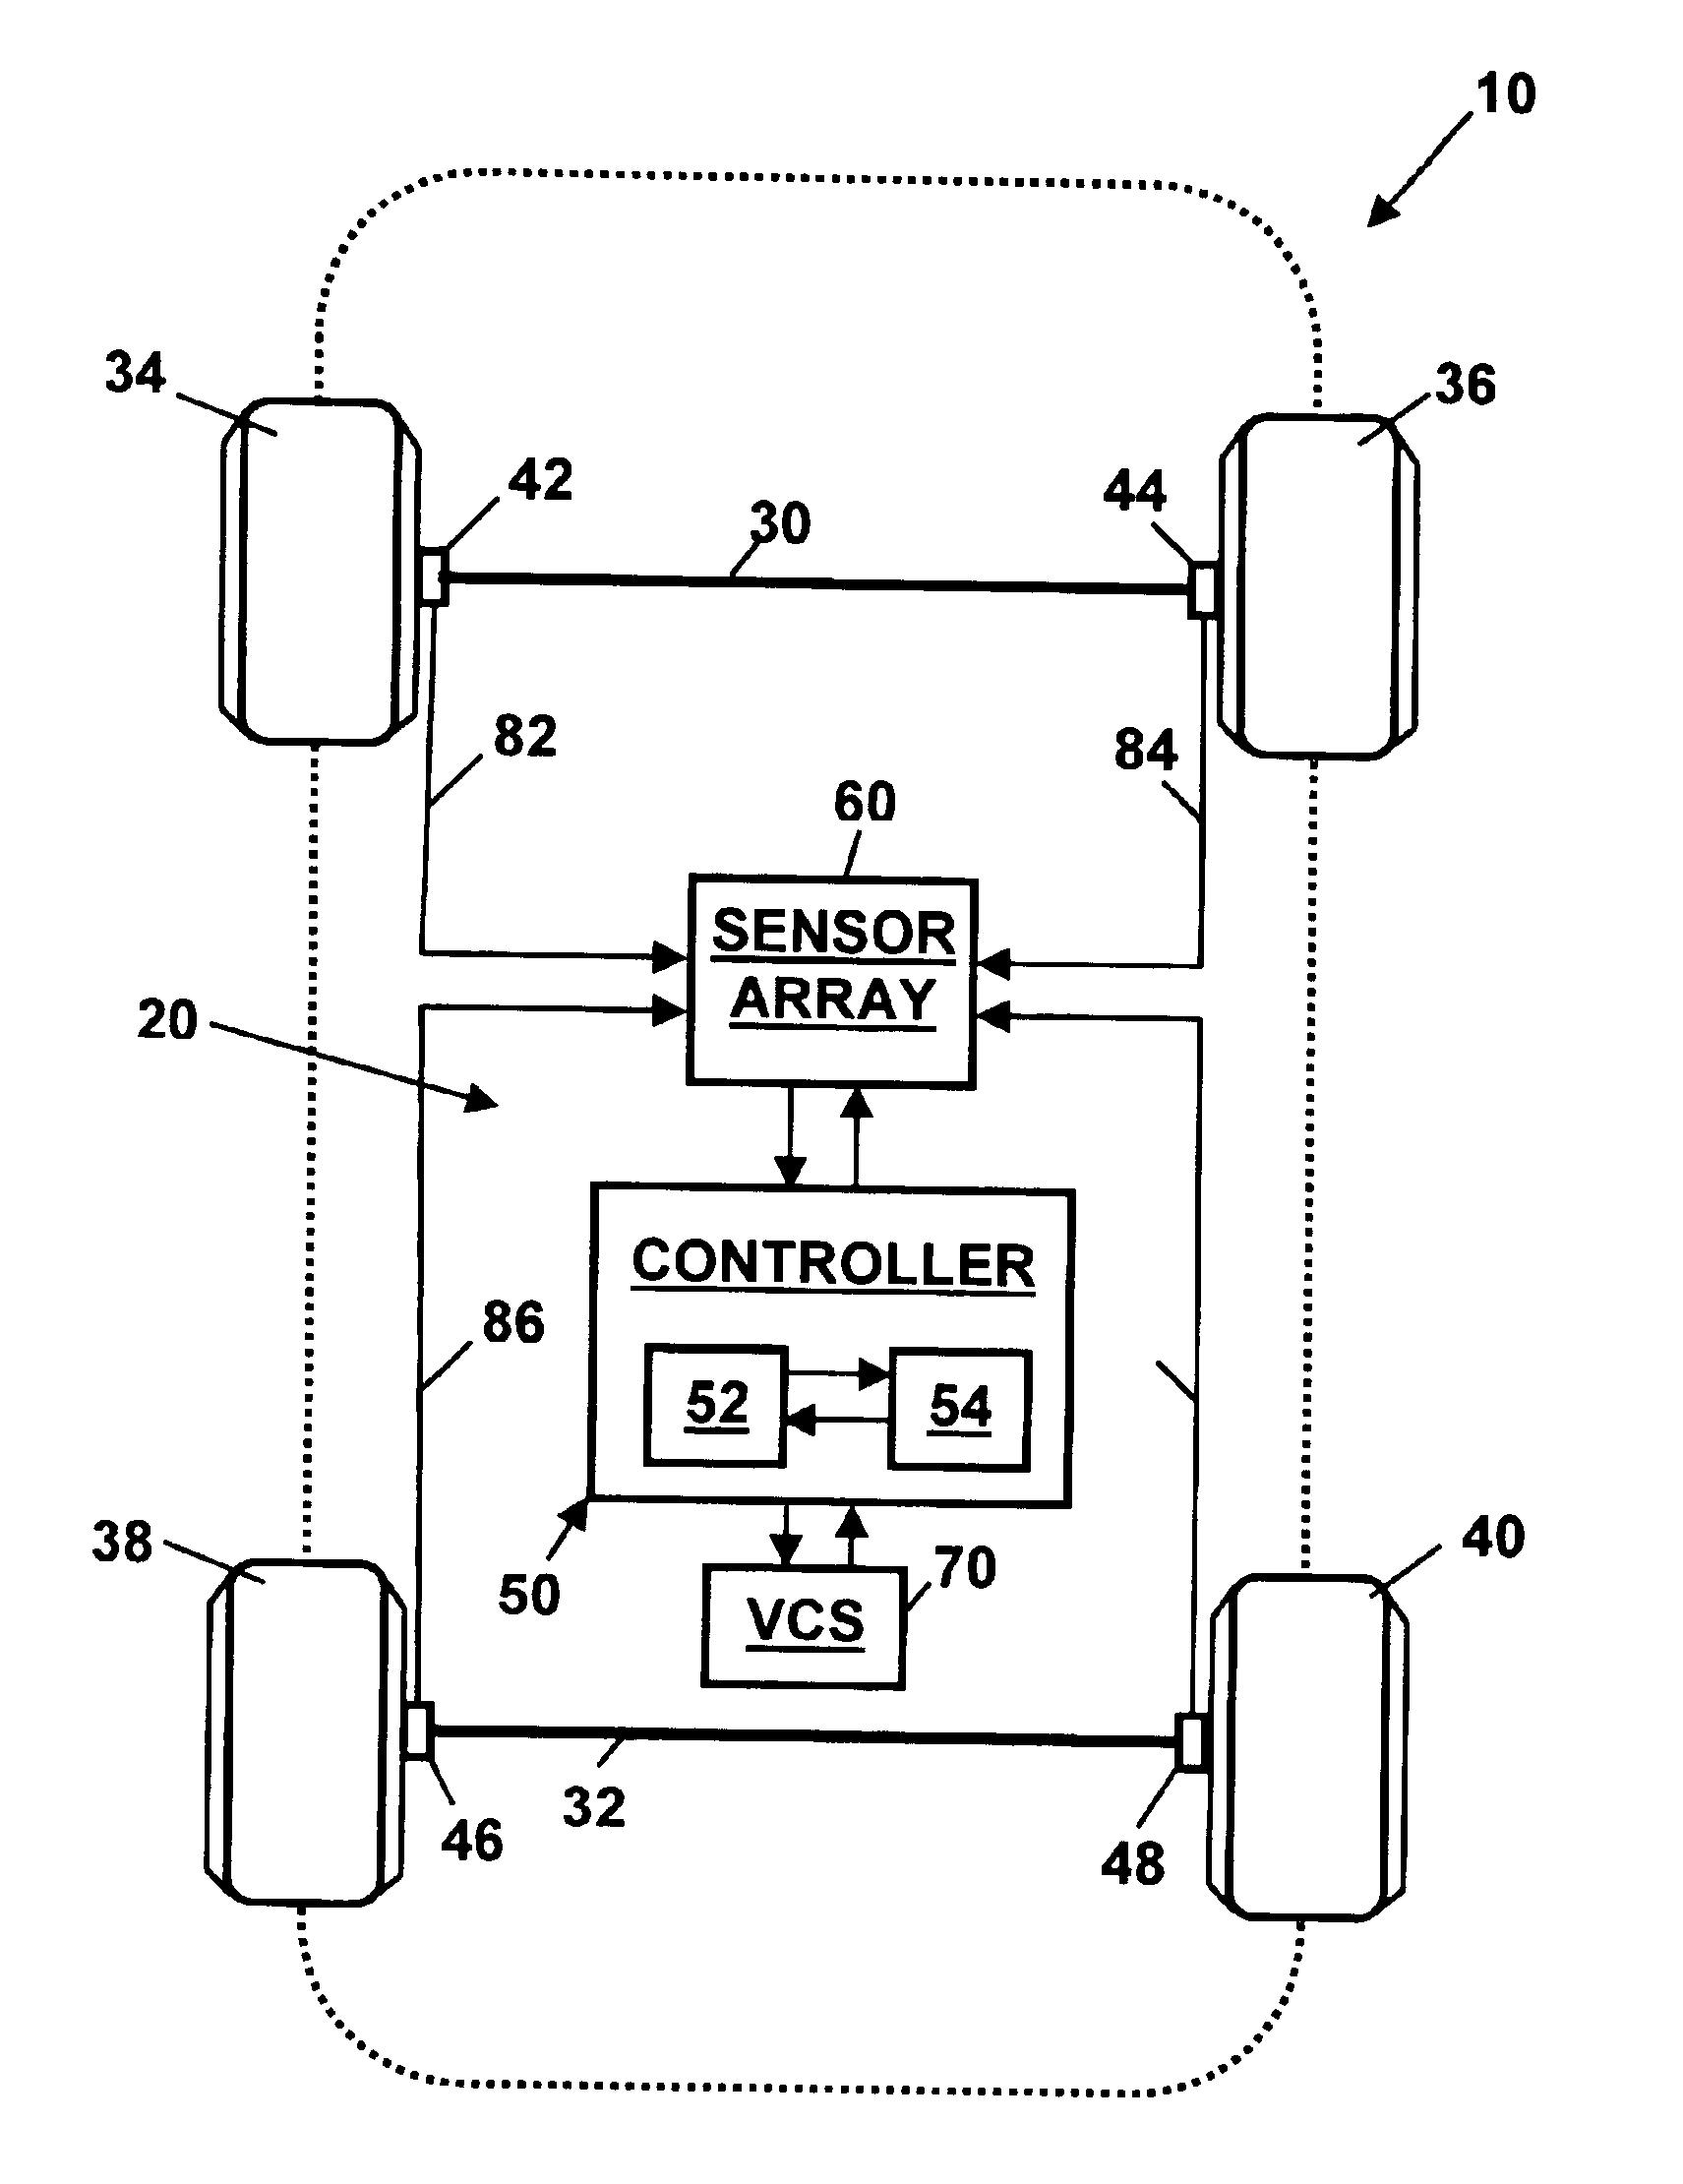 Operating a vehicle control system